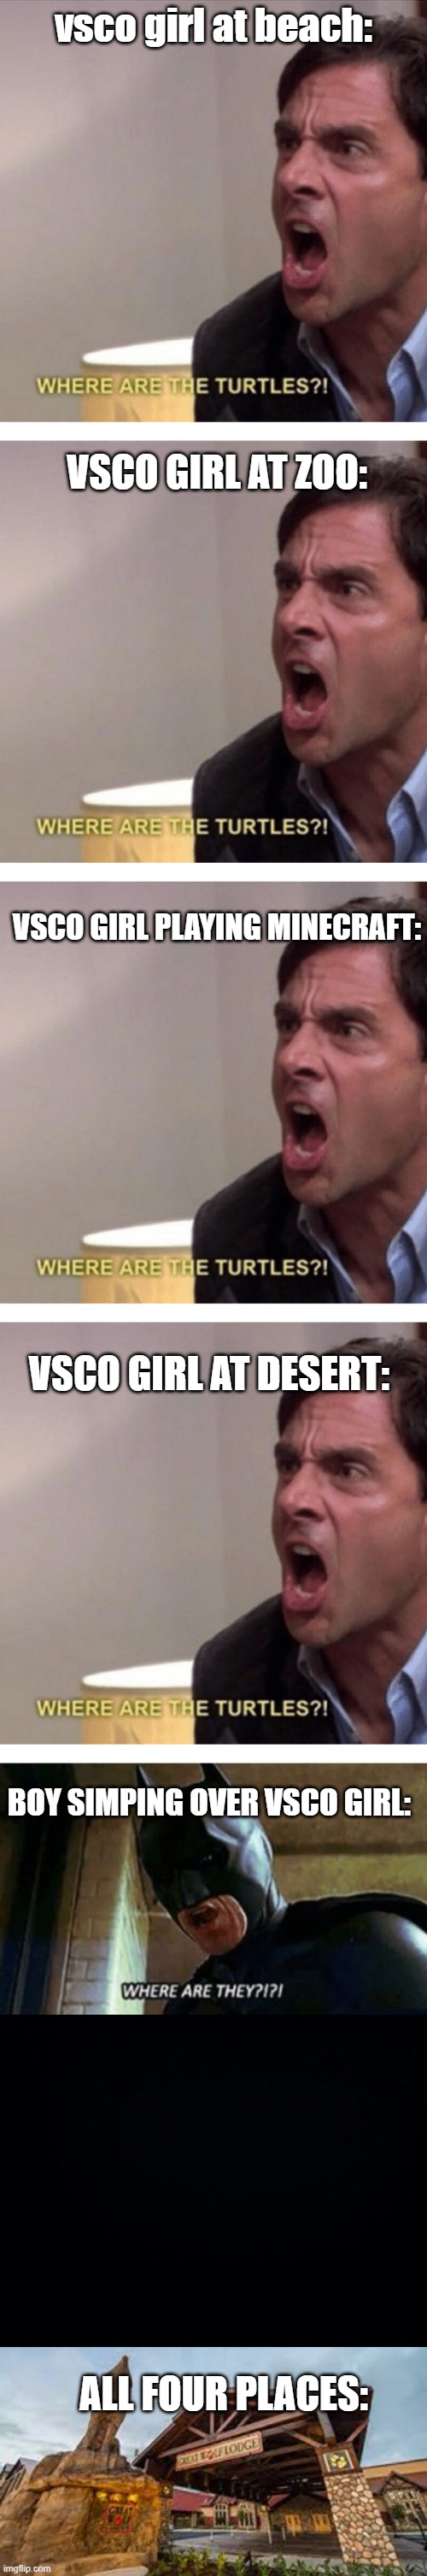 vsco girl at beach |  vsco girl at beach:; VSCO GIRL AT ZOO:; VSCO GIRL PLAYING MINECRAFT:; VSCO GIRL AT DESERT:; BOY SIMPING OVER VSCO GIRL:; ALL FOUR PLACES: | image tagged in where are the turtles,vsco | made w/ Imgflip meme maker